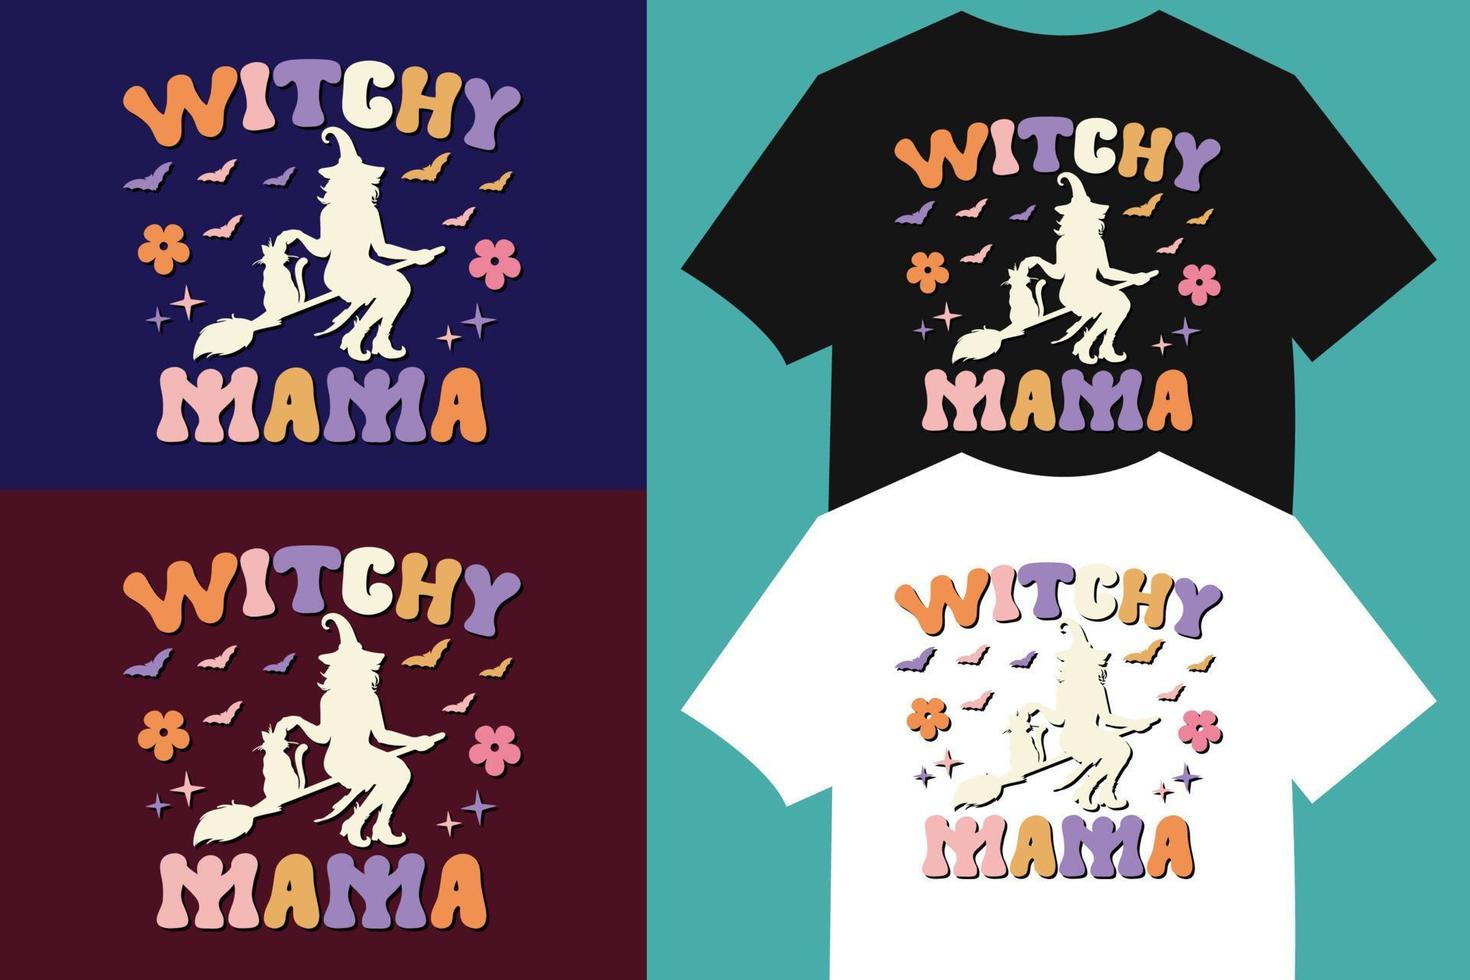 Witchy Mama Retro Halloween T-Shirt, Little Boo T-Shirt, Retro Halloween, kids Season, Wavy T-shirt design. vector